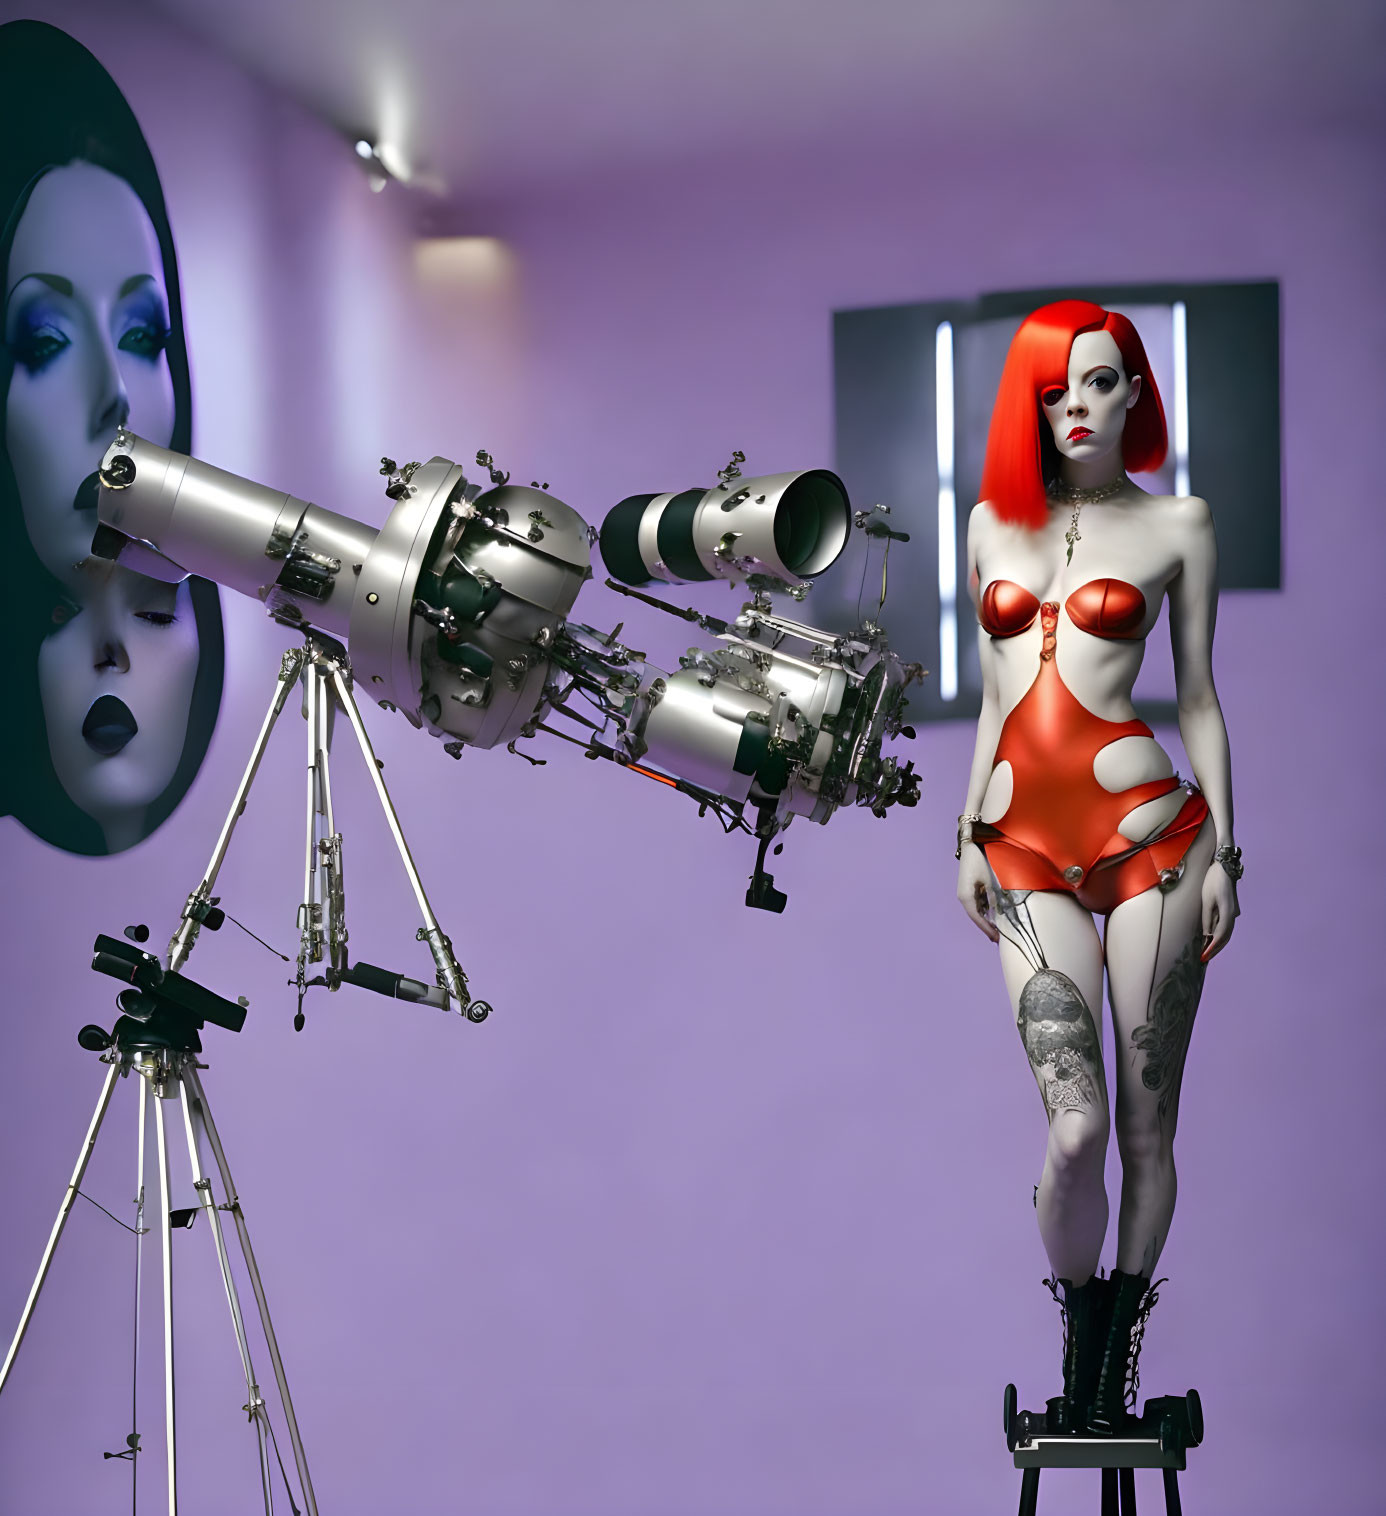 Large Telescope Observing Red-Haired Mannequin in Two-Piece Outfit